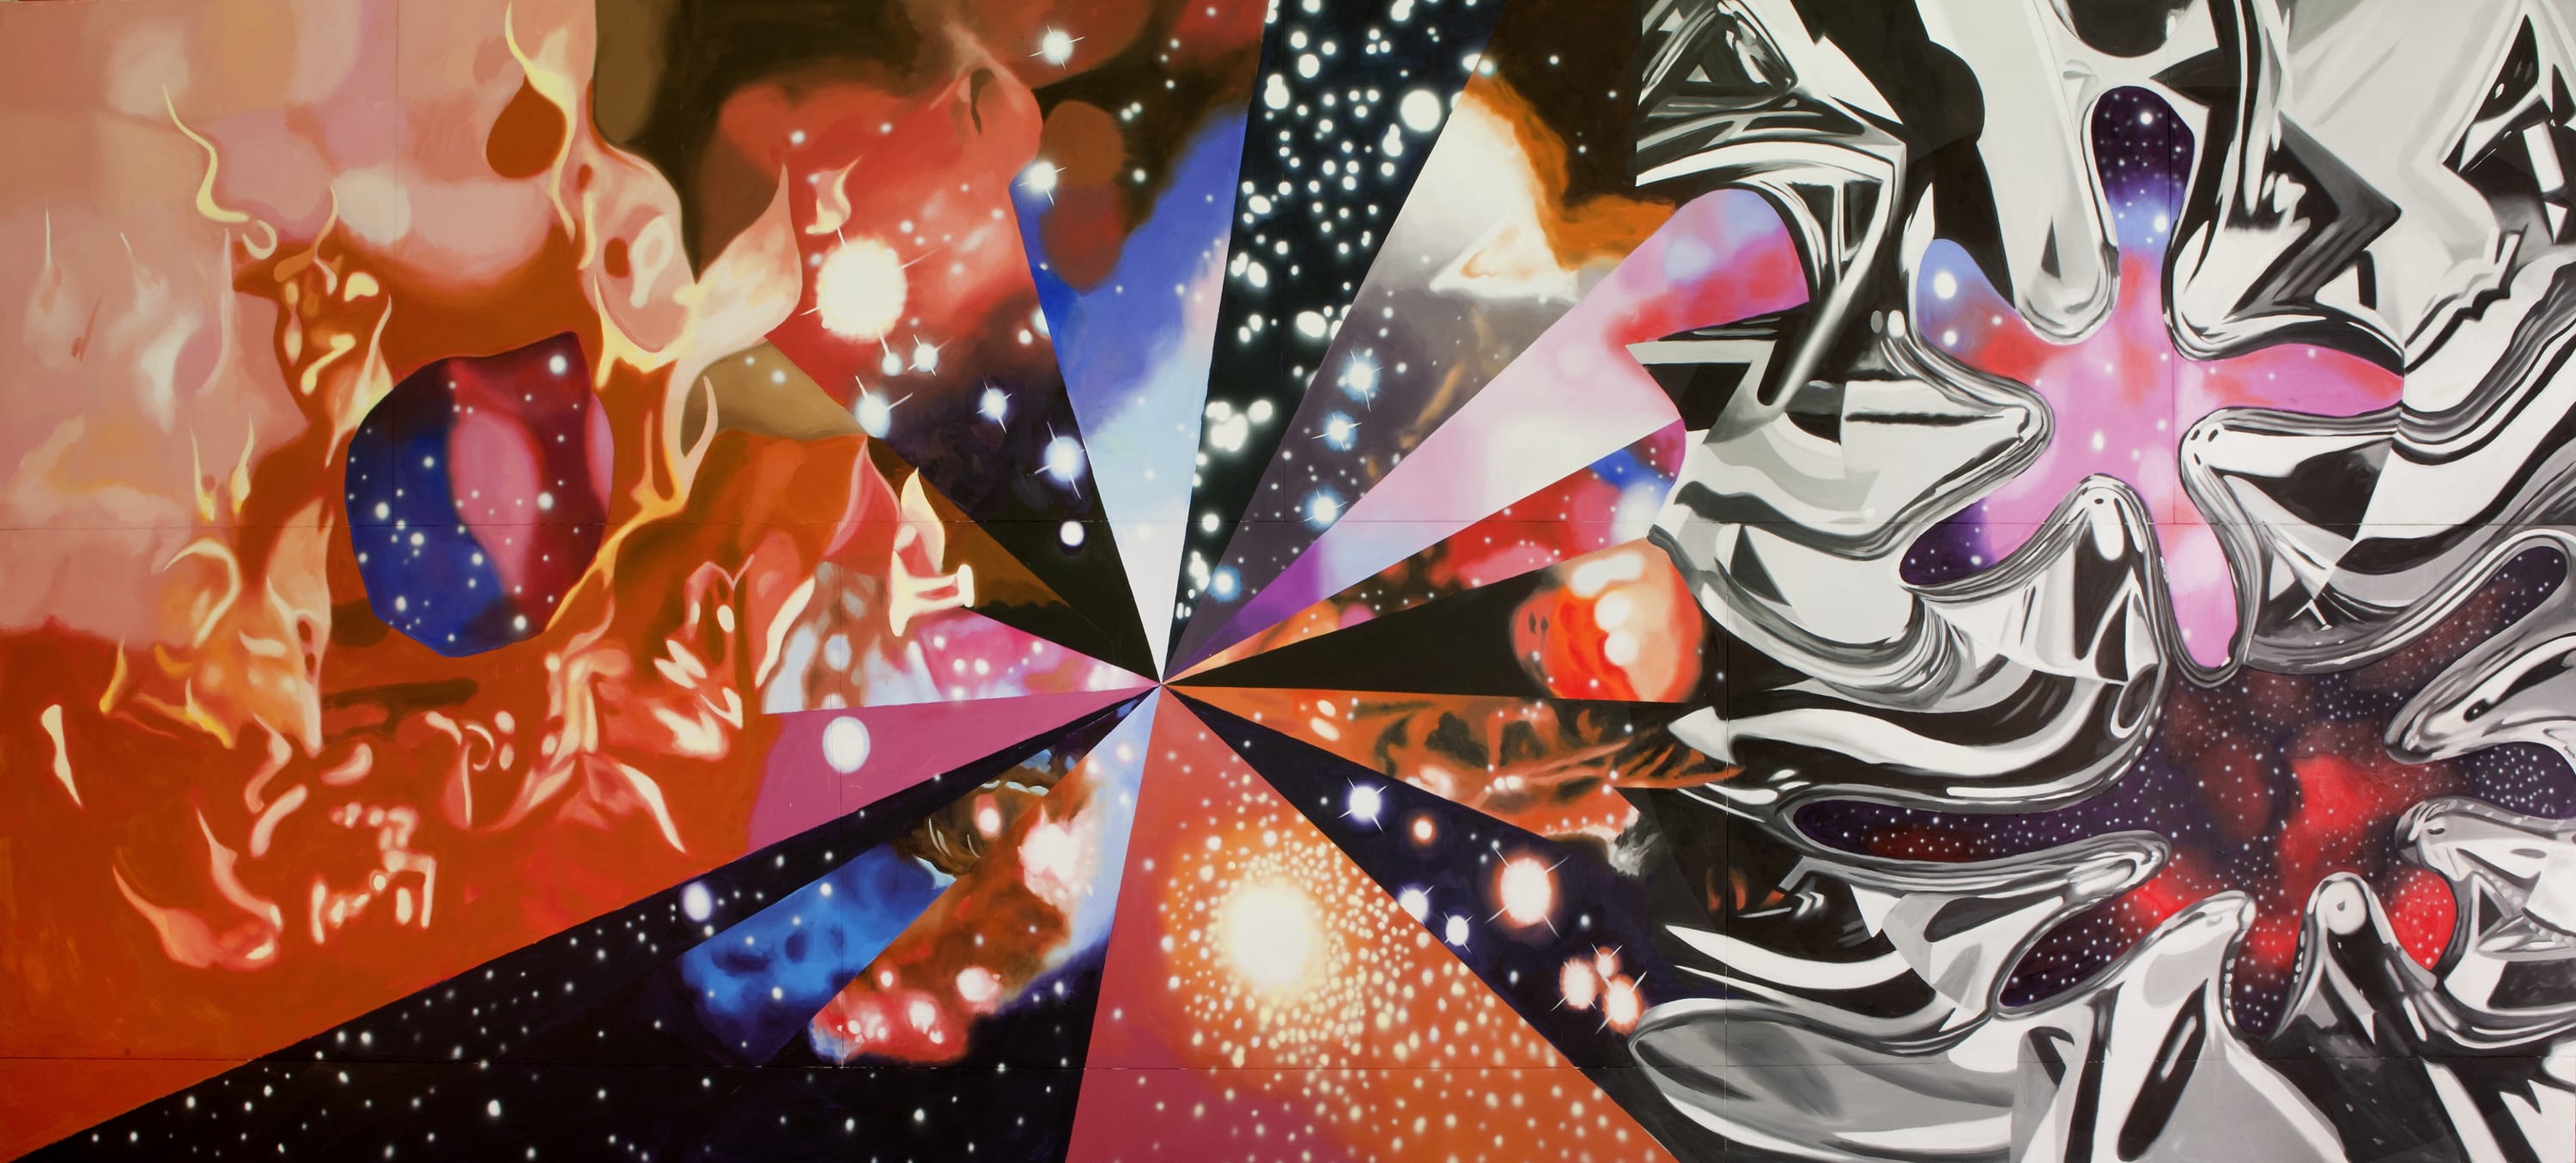 James Rosenquist's 'The Geometry of Fire' Rosenquist's painting enters the collection at MoMA